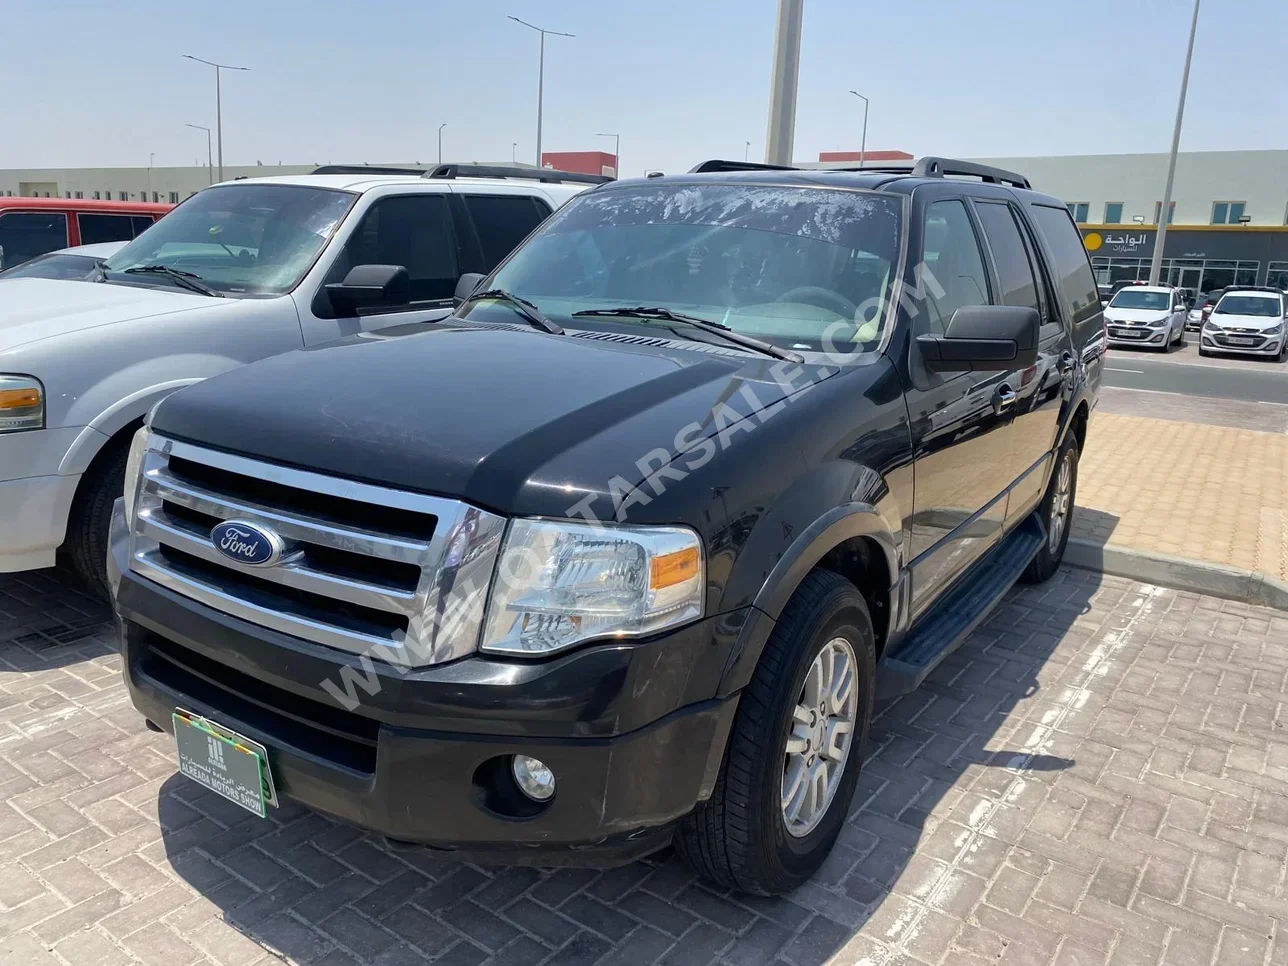 Ford  Expedition  XLT  2011  Automatic  285,000 Km  6 Cylinder  Four Wheel Drive (4WD)  SUV  Black